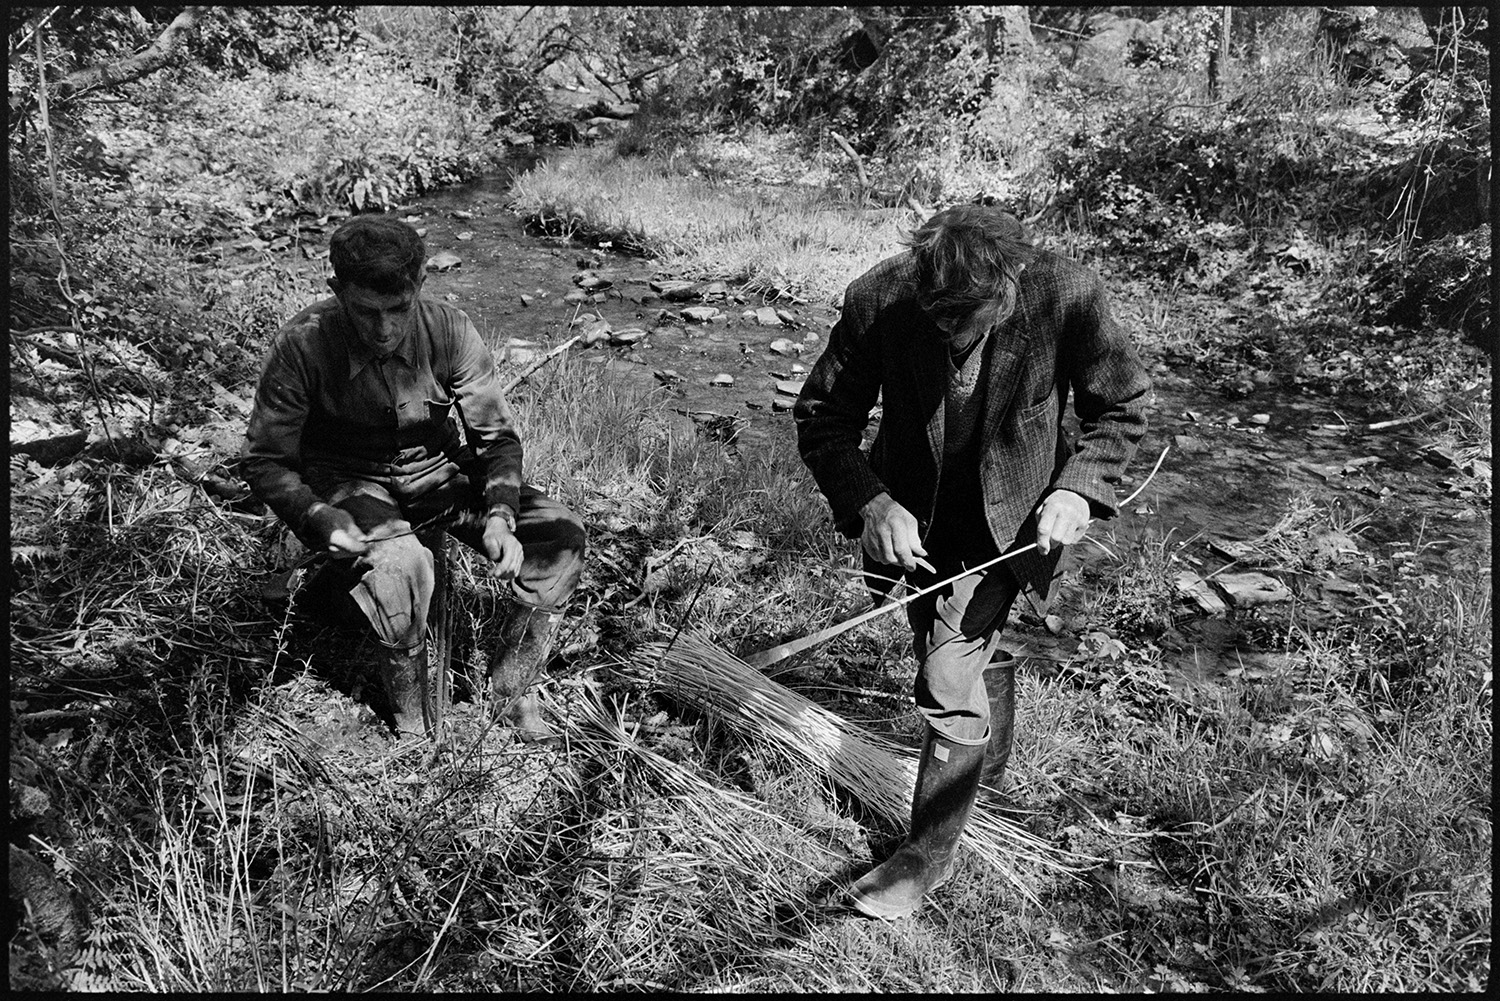 Two skinning (stripping) rods (willows) for basketwork. 
[Bill Folland and Bill Cooke stripping or skinning rods of willow to be used in basket making, near a stream at Colehouse, Riddlecombe. Bill Cooke is using a knife.]